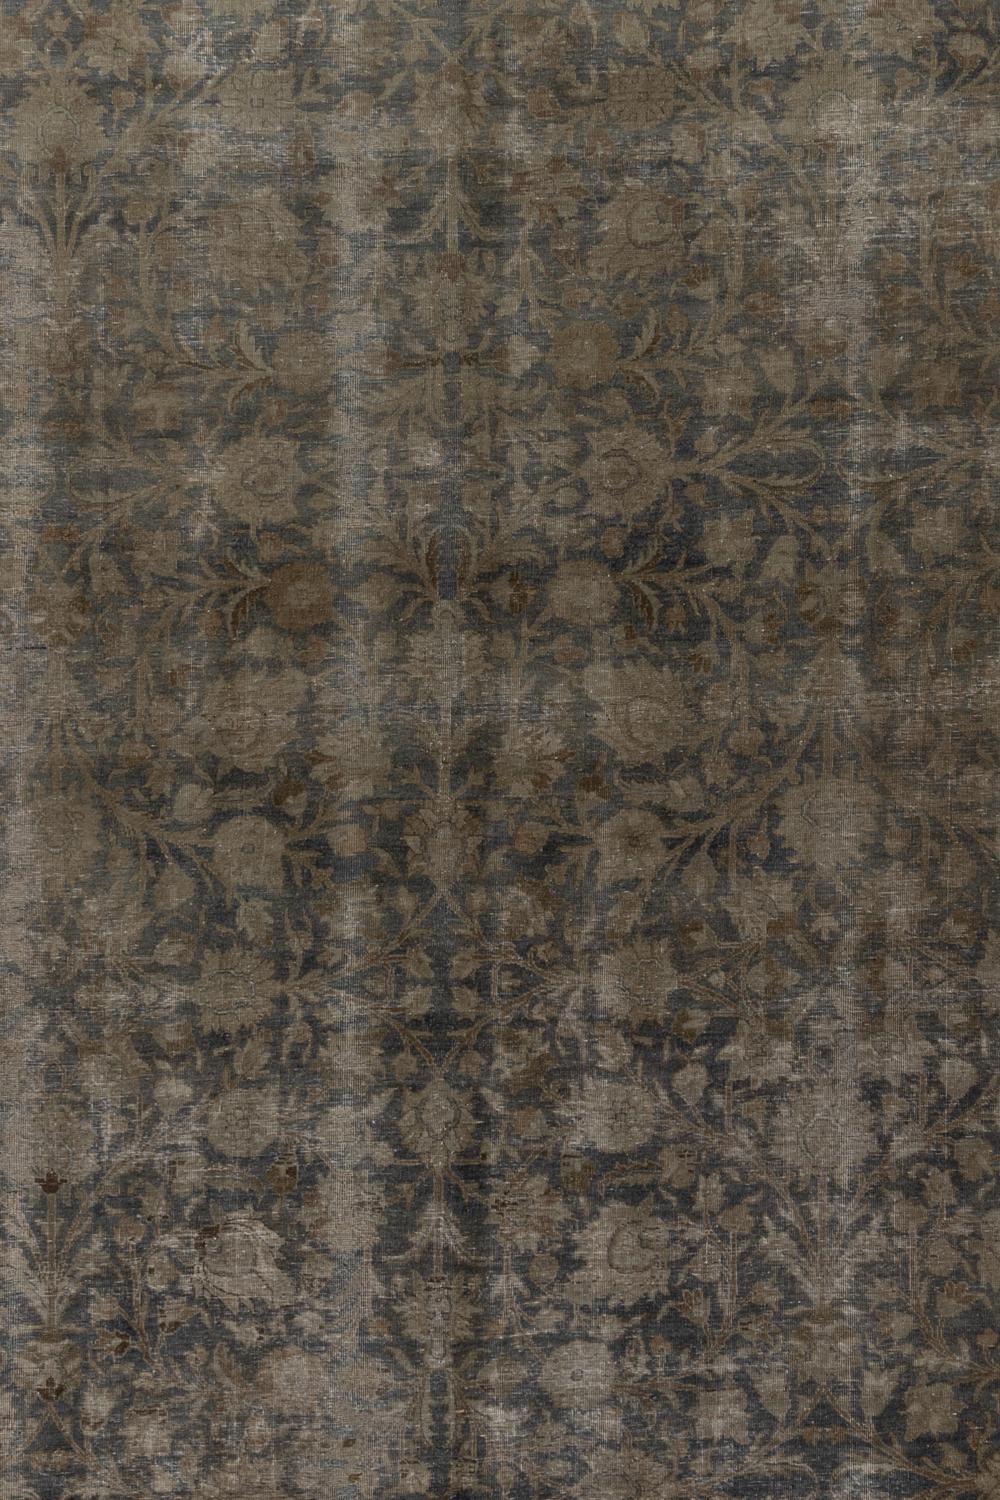 Age: first quarter 20th century 

Pile: Low

Wear Notes: 3-4

Material: Wool on Cotton

Vintage rugs are made by hand over the course of months, sometimes years. Their imperfections and wear are evidence of the hard working human hands that made